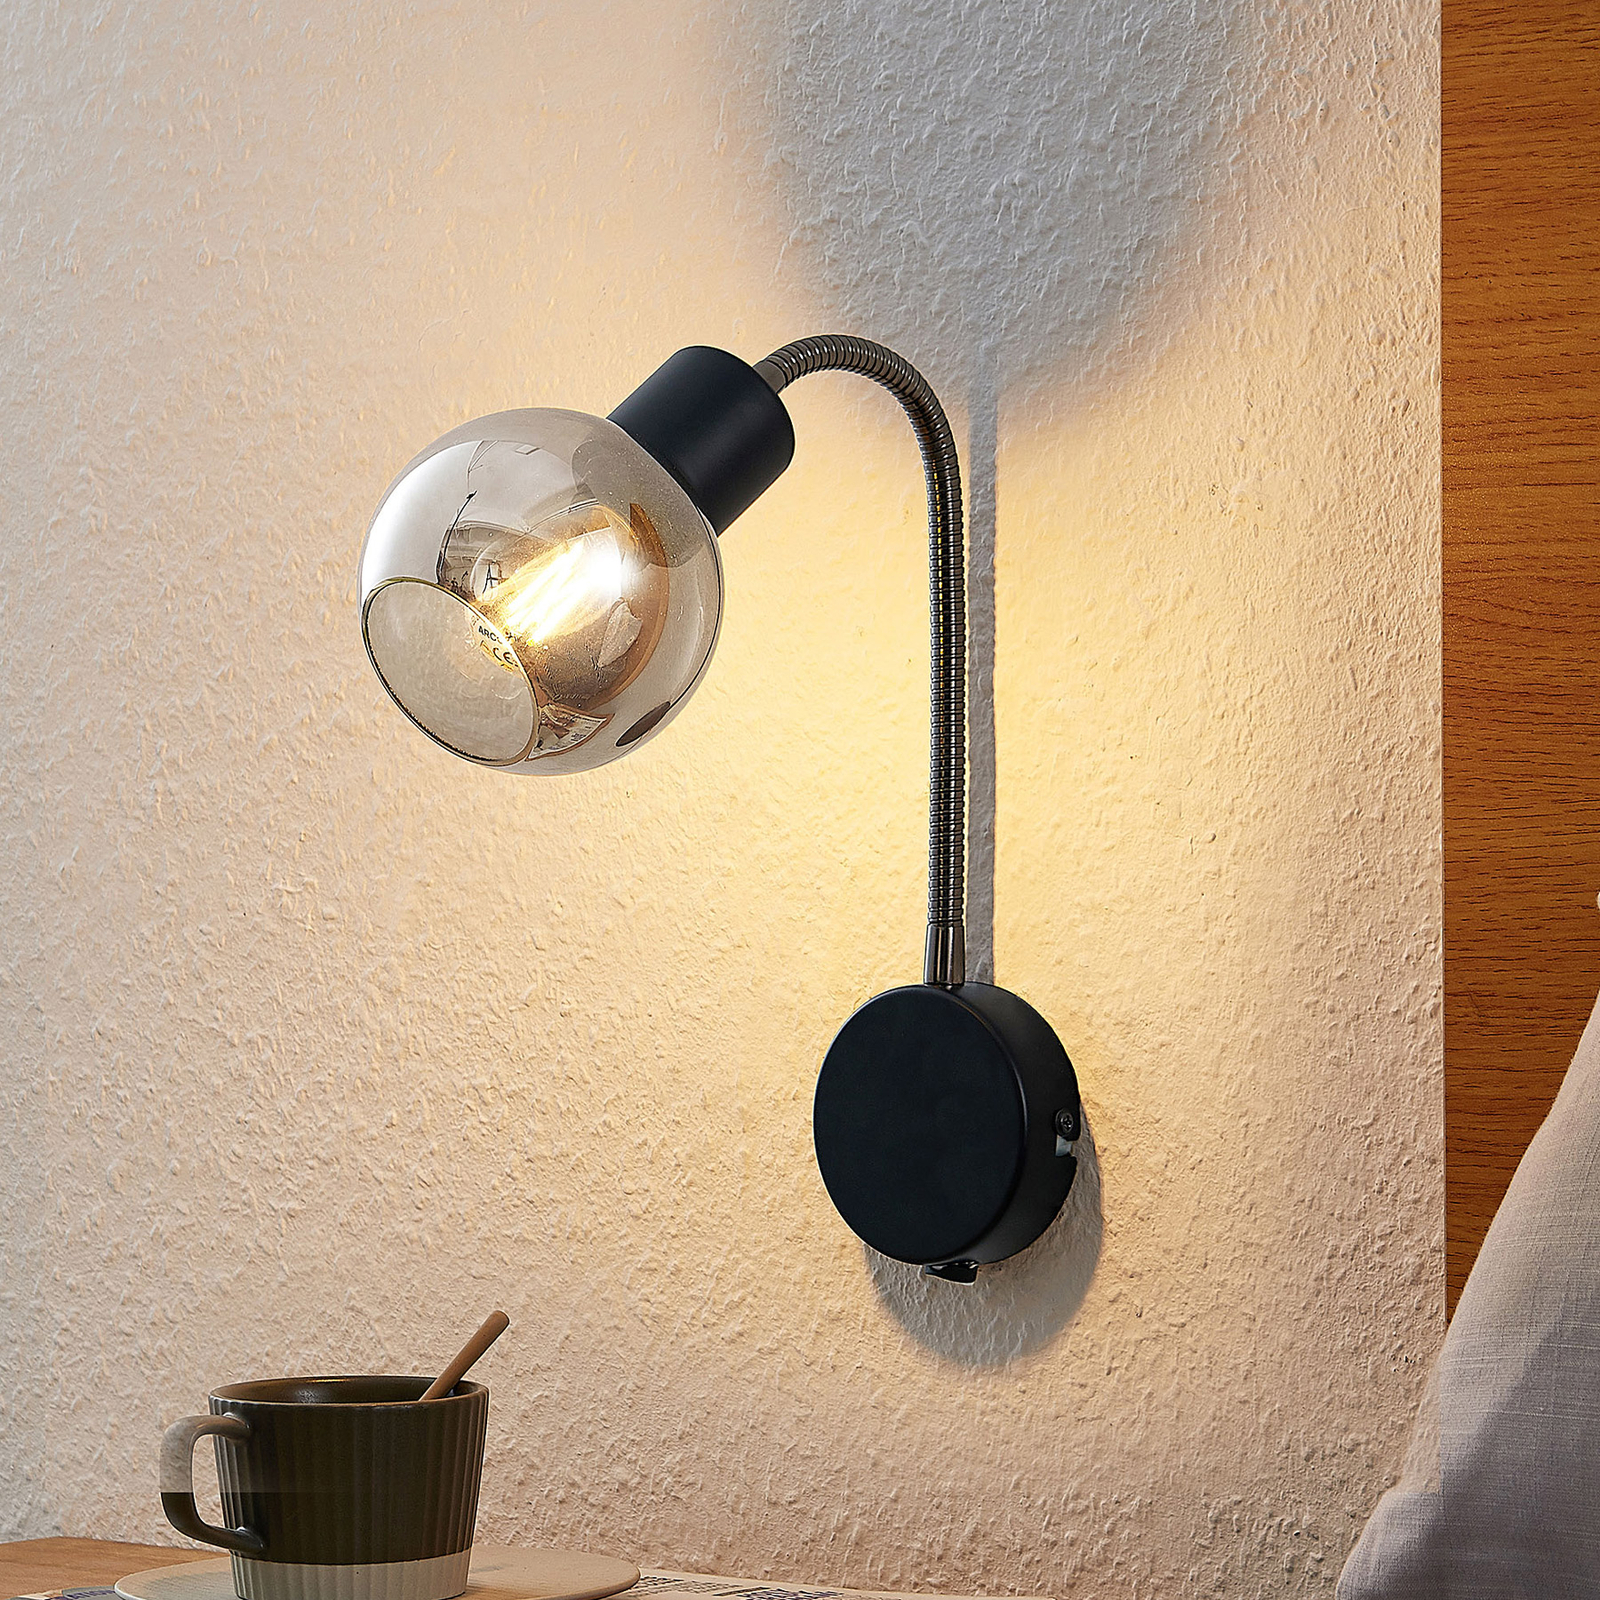 Lindby Lioma wall light with flexible arm, black